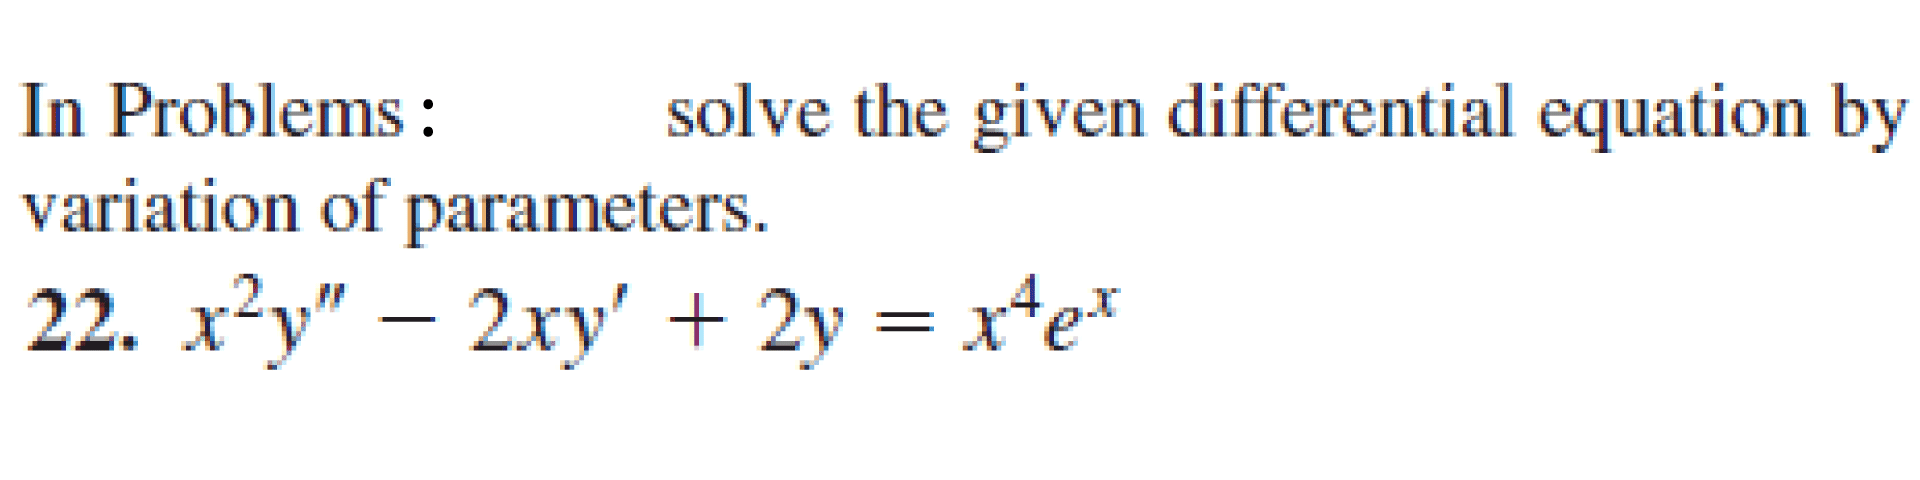 In Problems :
variation of parameters.
solve the given differential equation by
22. x²y" – 2xy' + 2y = x*e*
